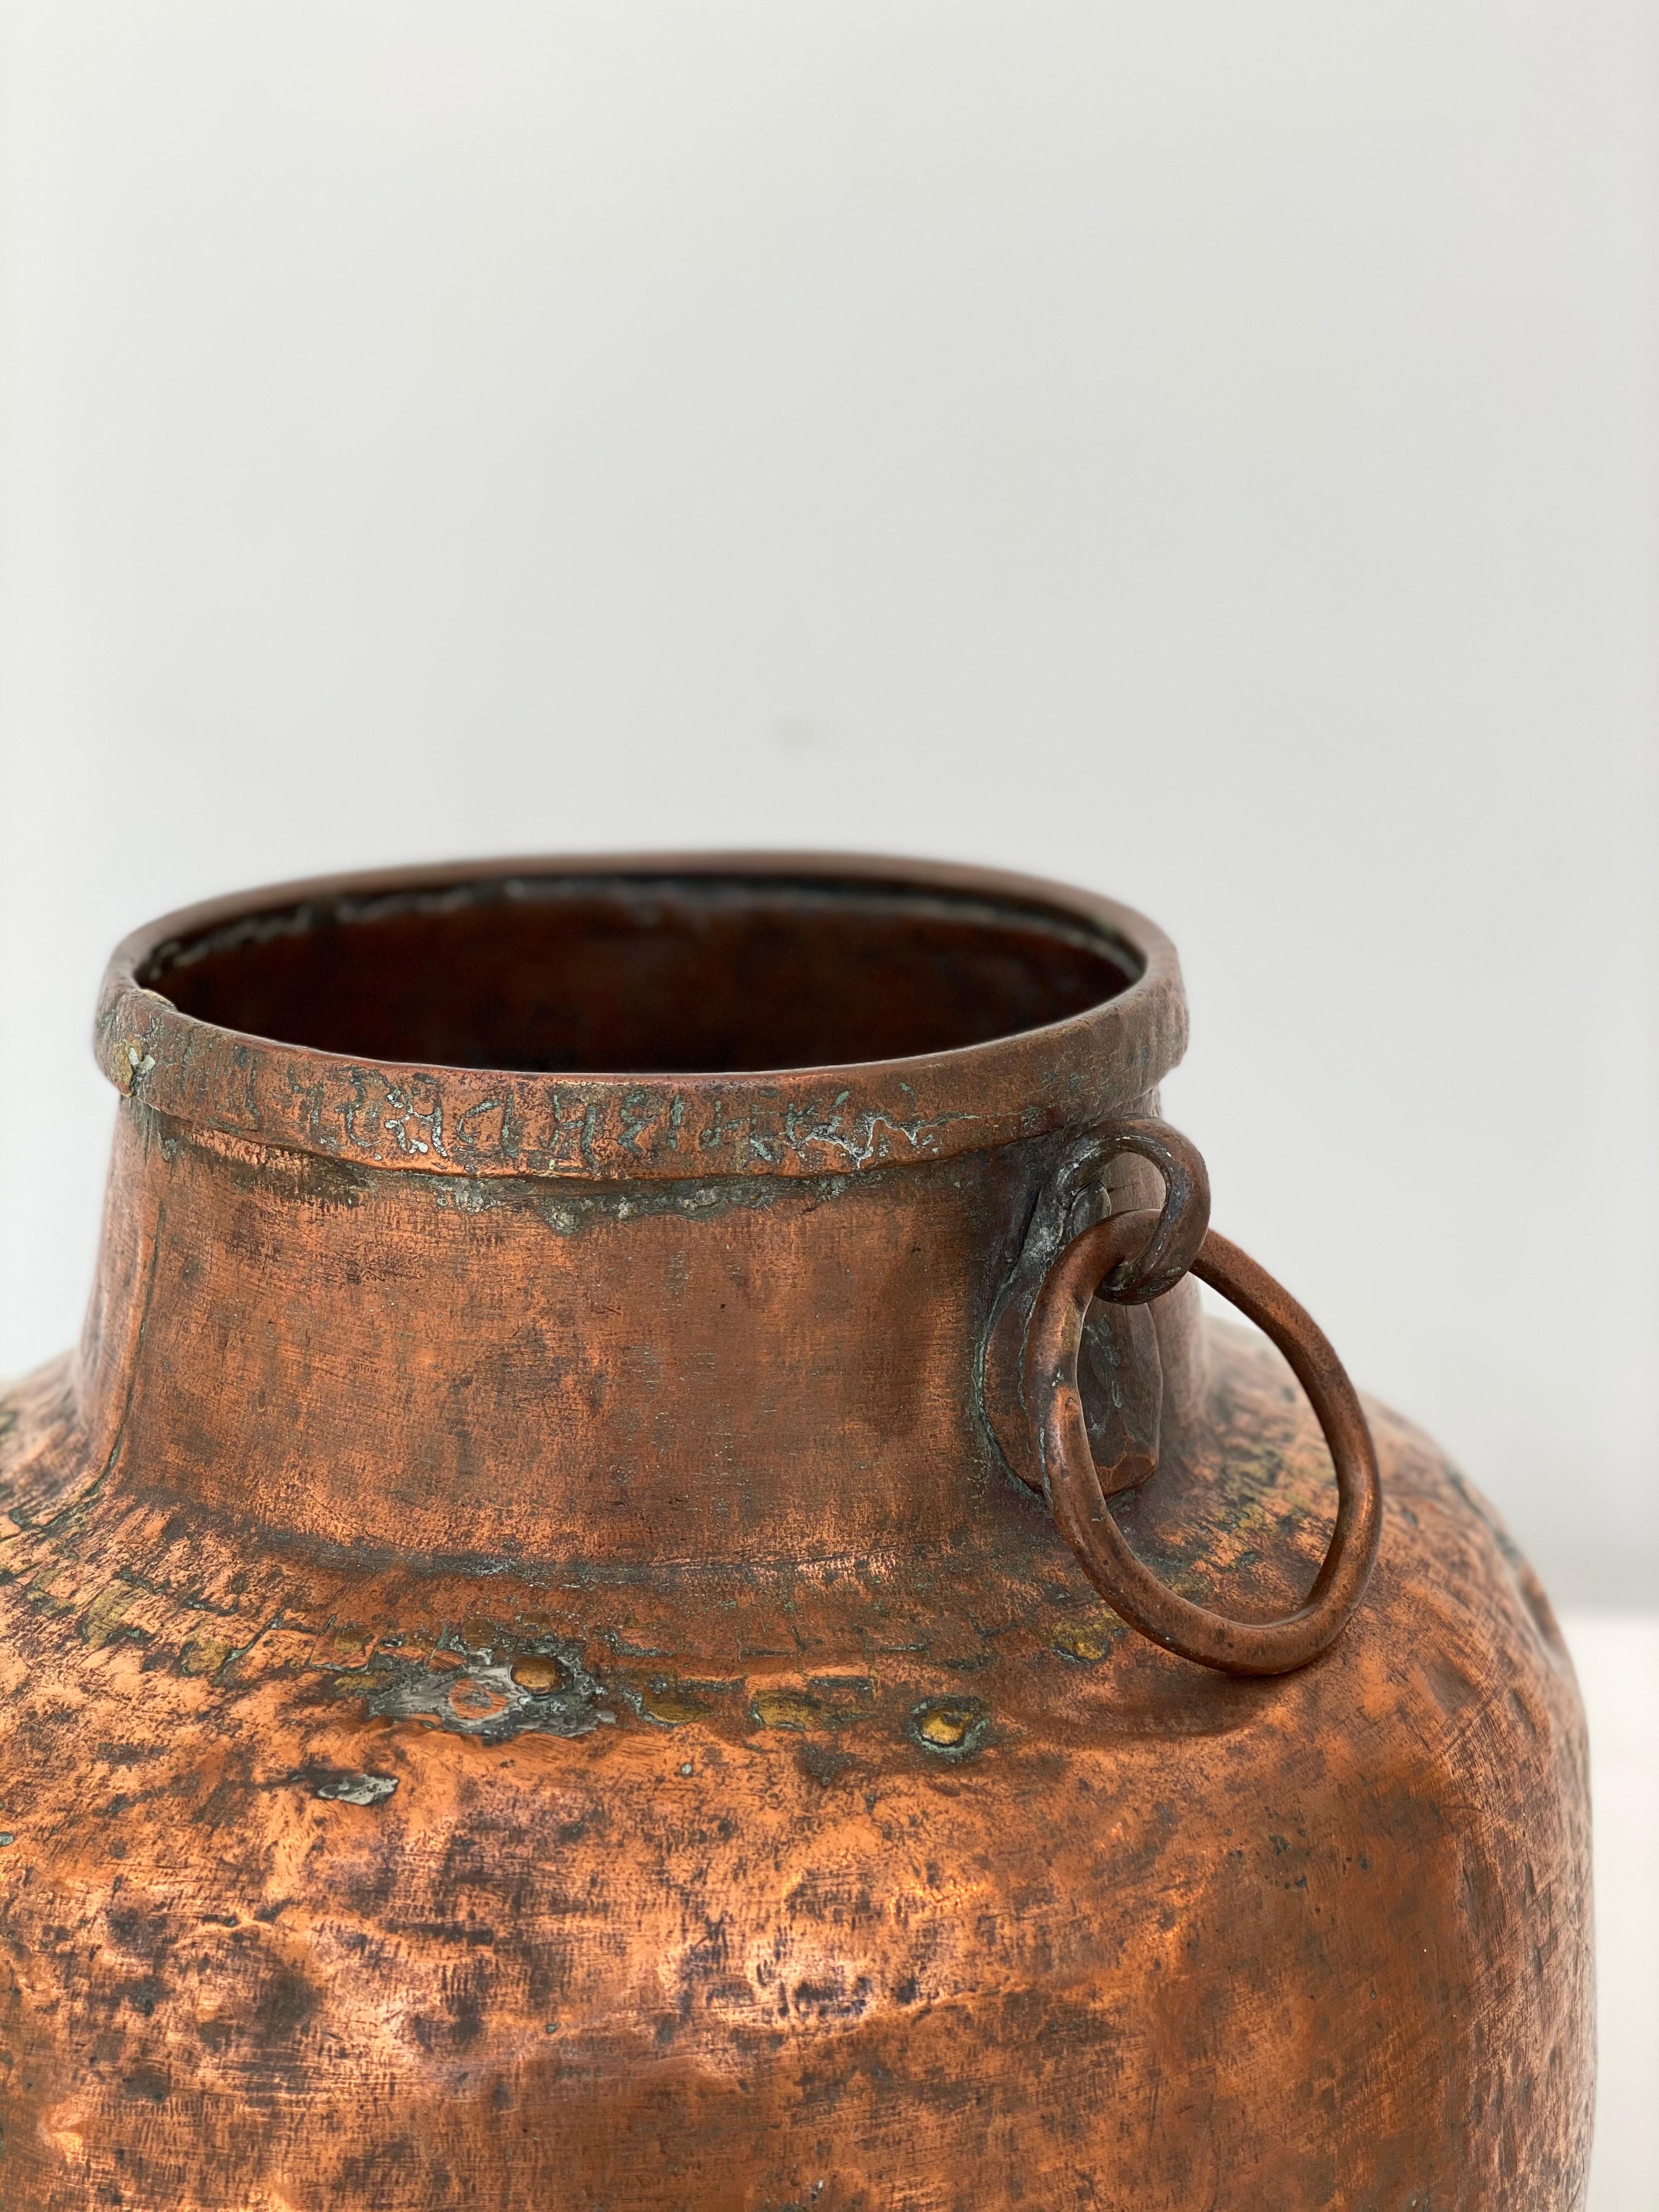 Ottoman Hammered Copper Vessel, 18th Century For Sale 5